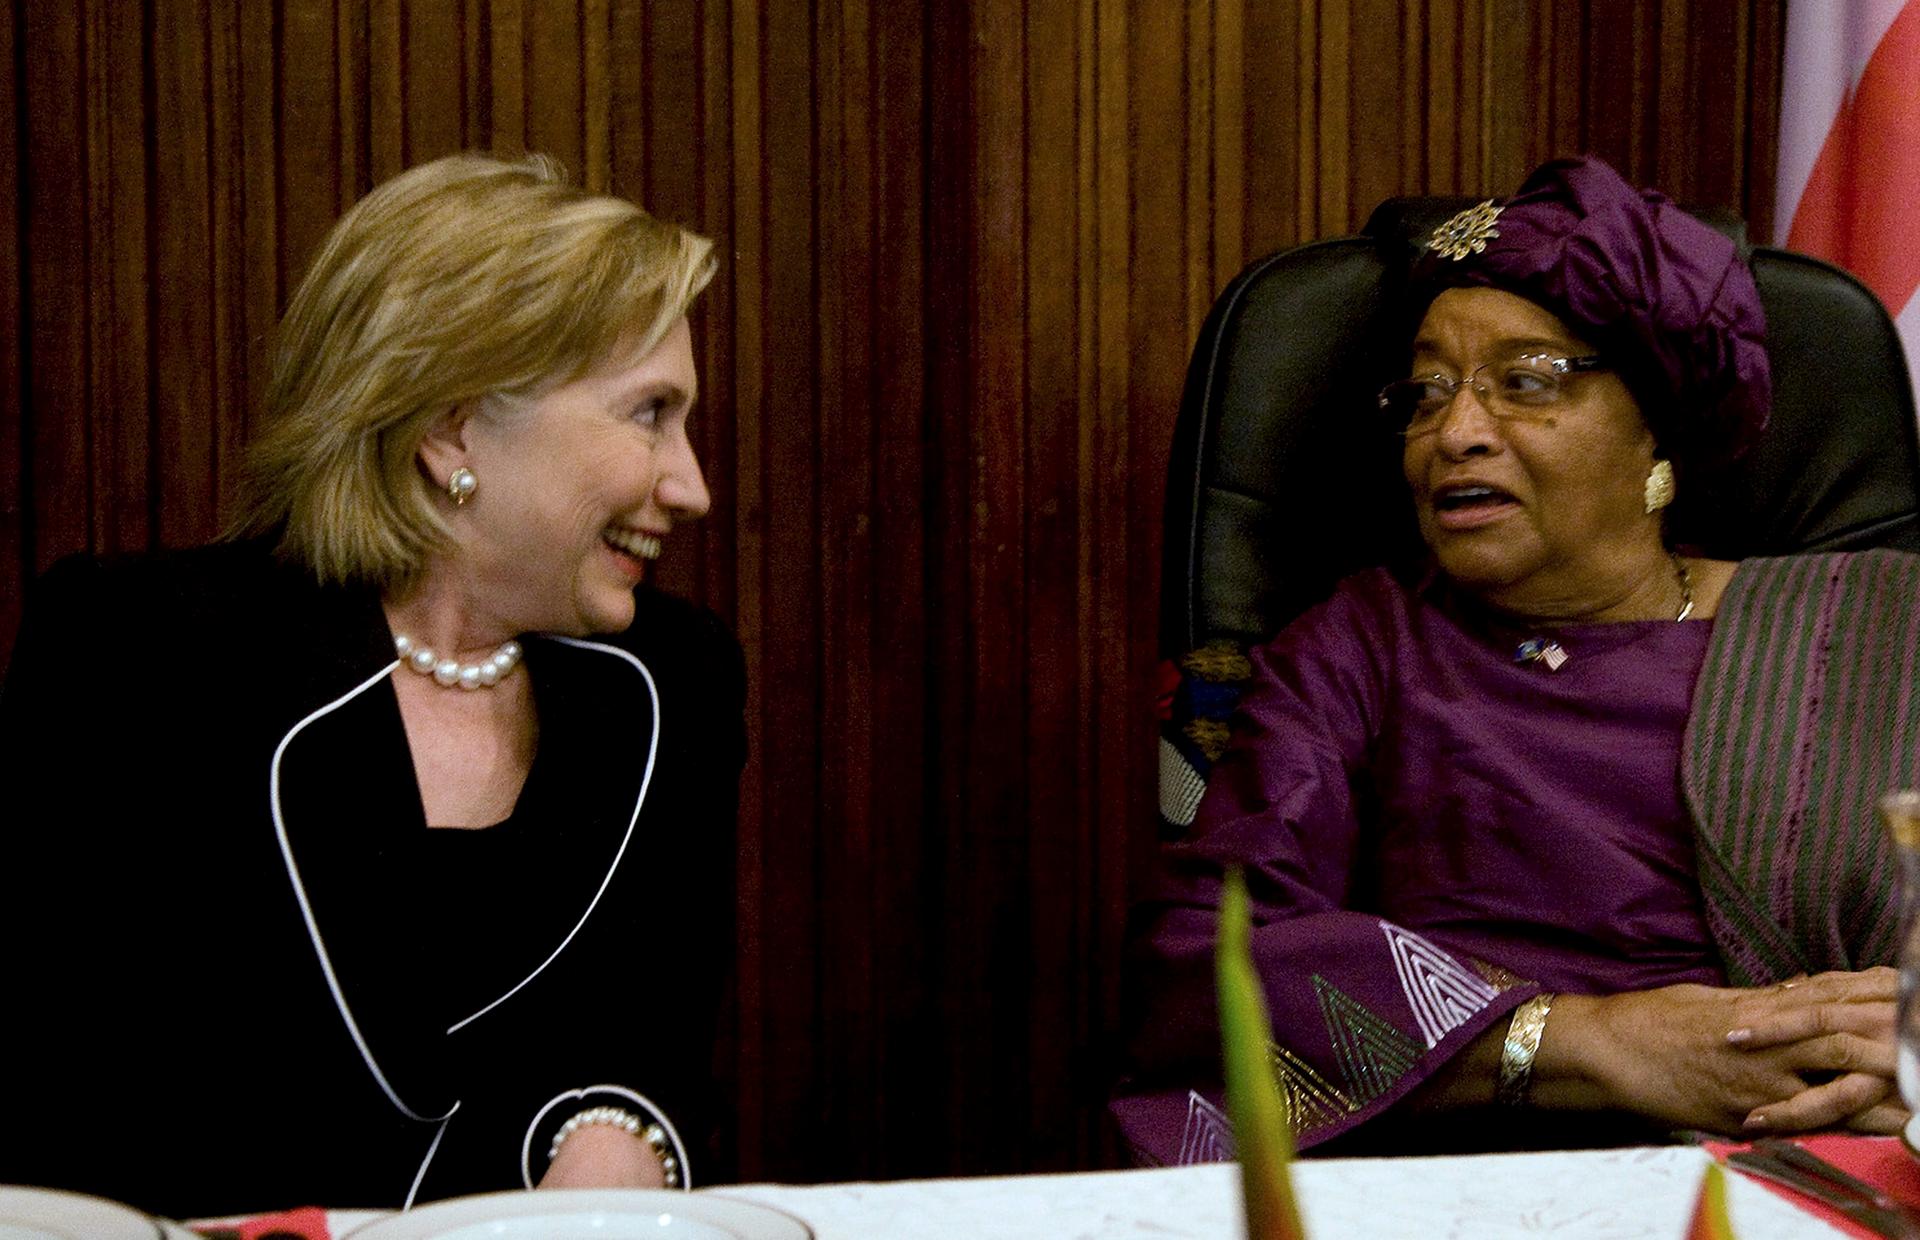 US Secretary of State Hillary Clinton traveled to Liberia to support President Ellen Johnson-Sirleaf, Africa's only female president.